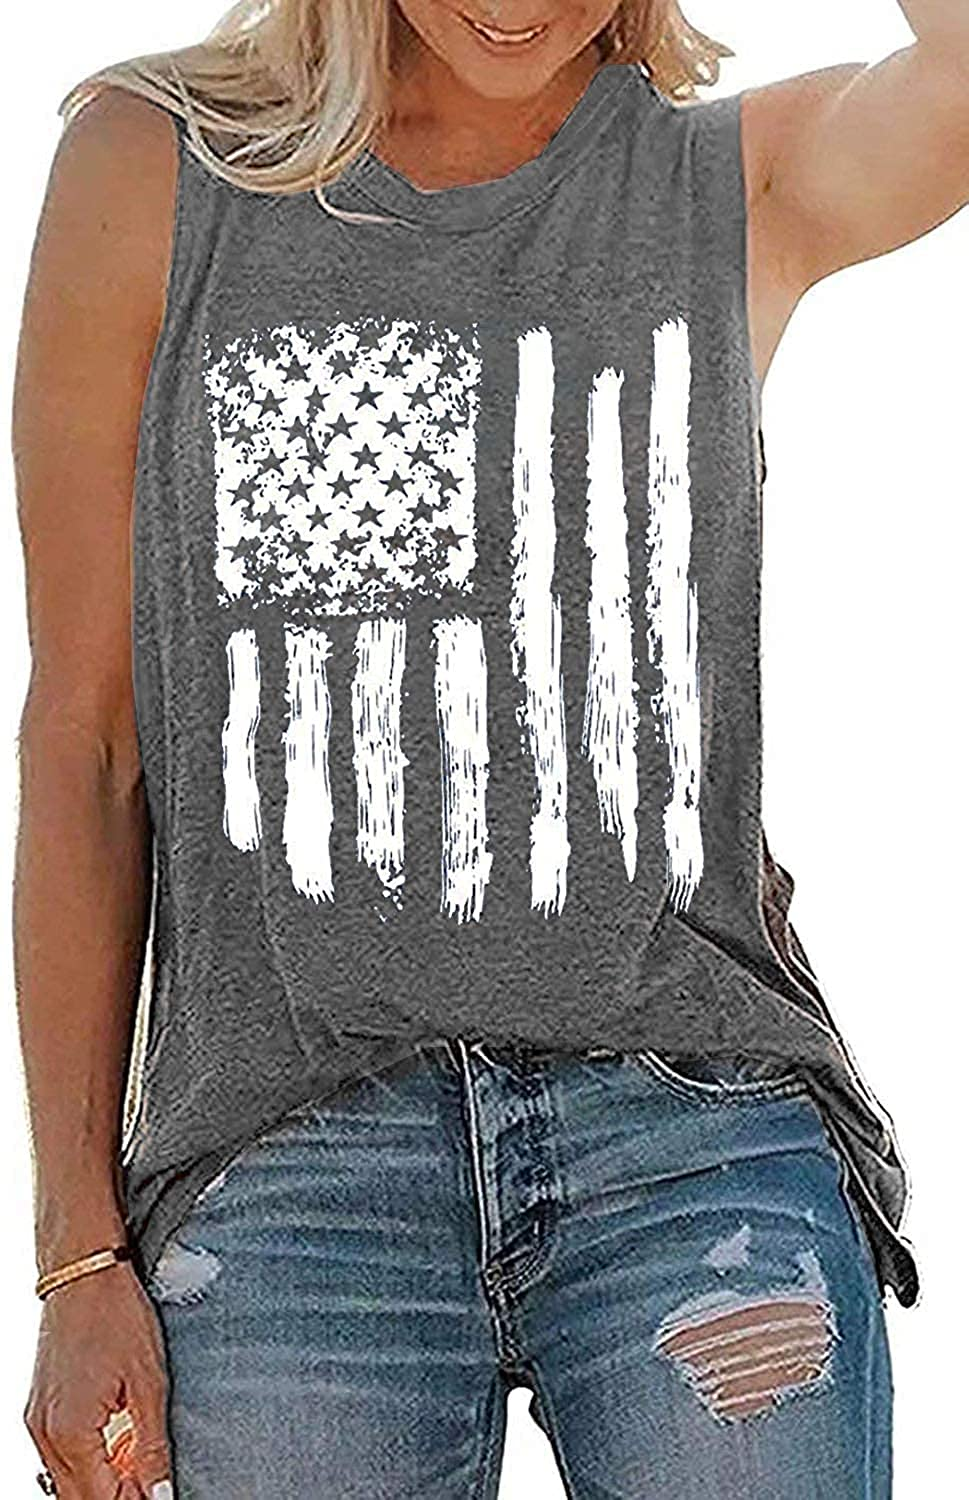 American Flag Tank Tops for Women We the People 1776 Sleeveless T-Shirt 4Th of July Tee Tops